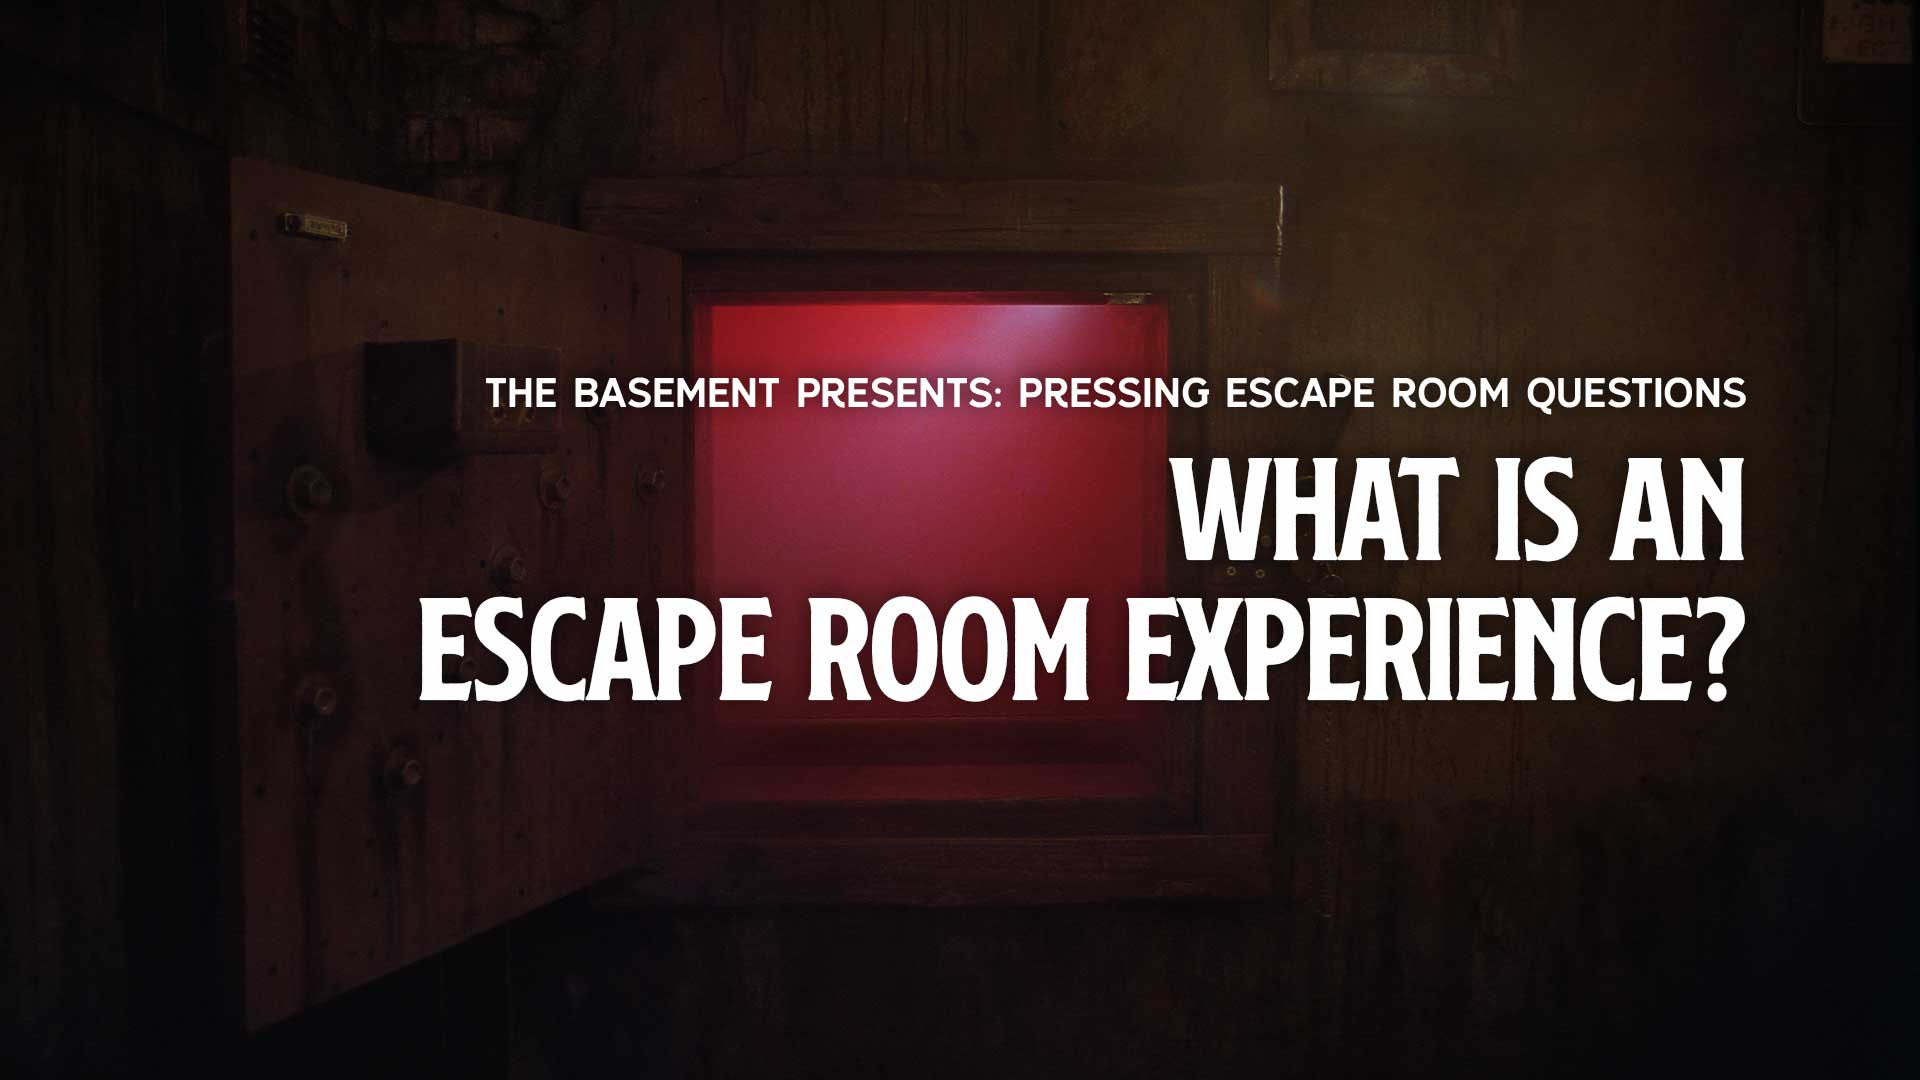 What is an escape room experience?